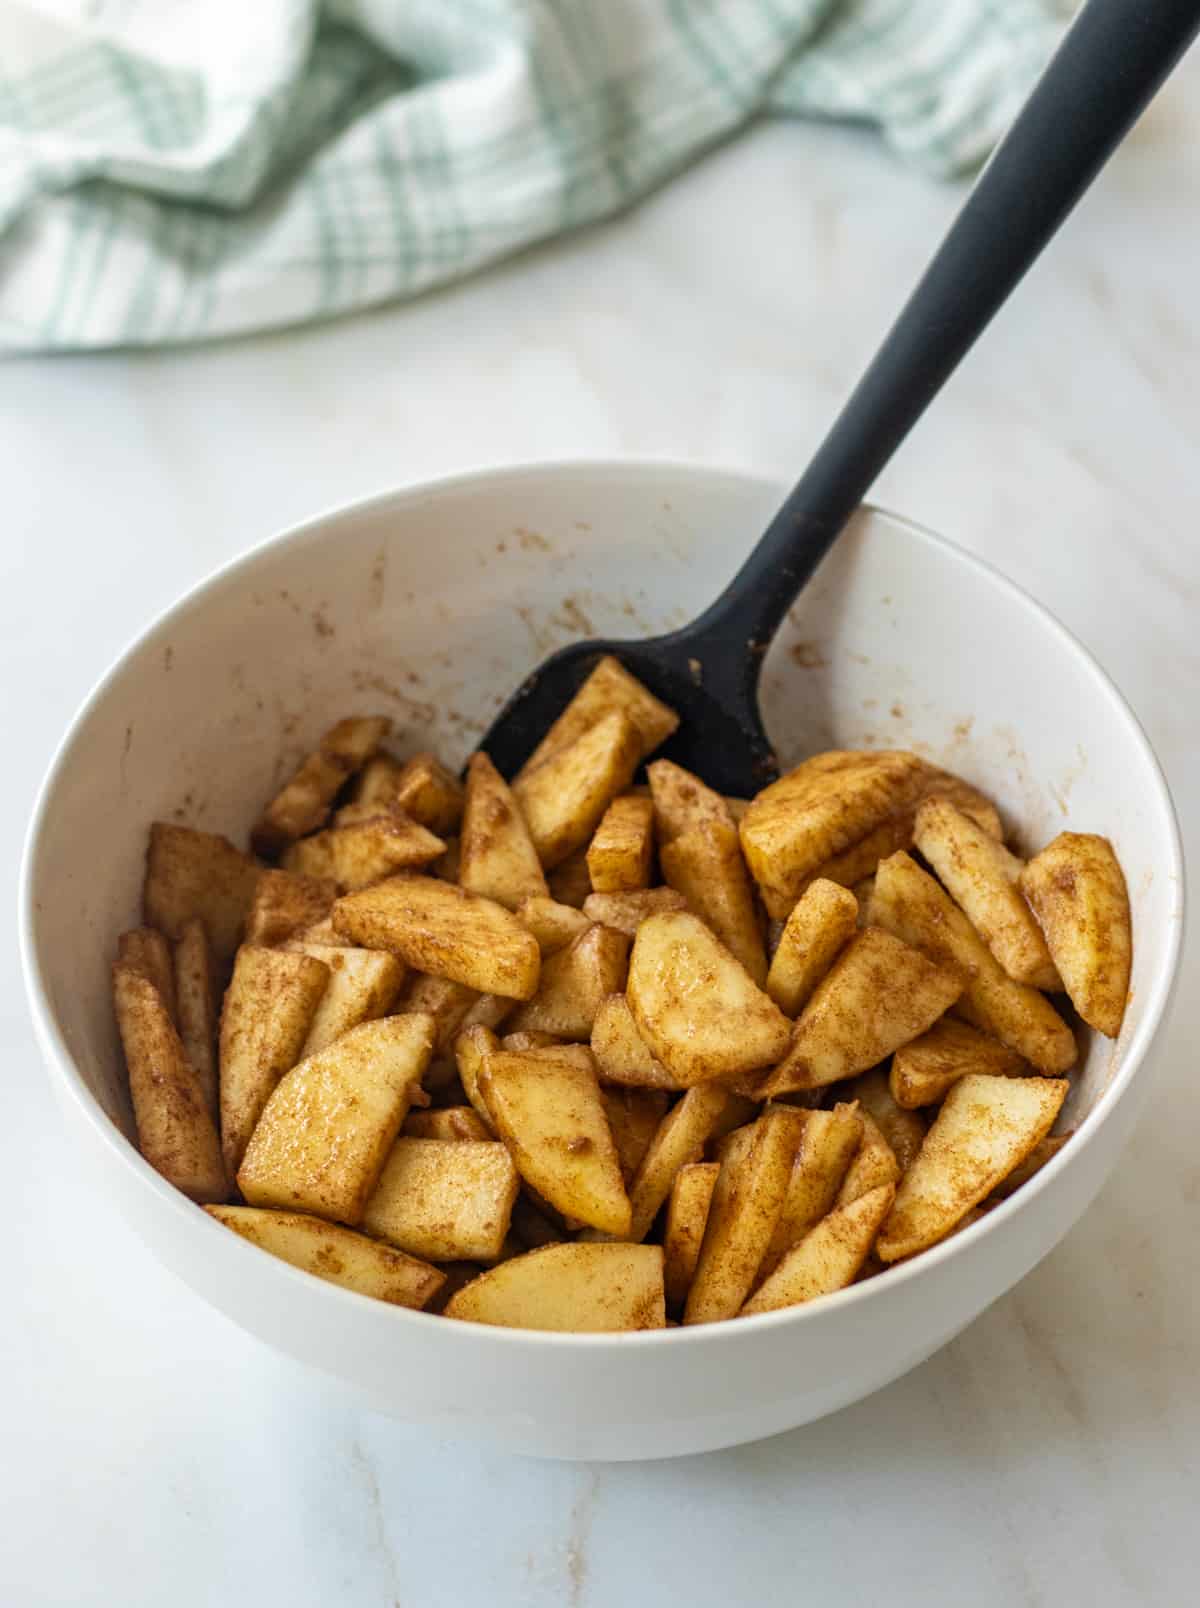 Apple slices tossed with brown sugar and cinnamon in a bowl with a rubber spatula.